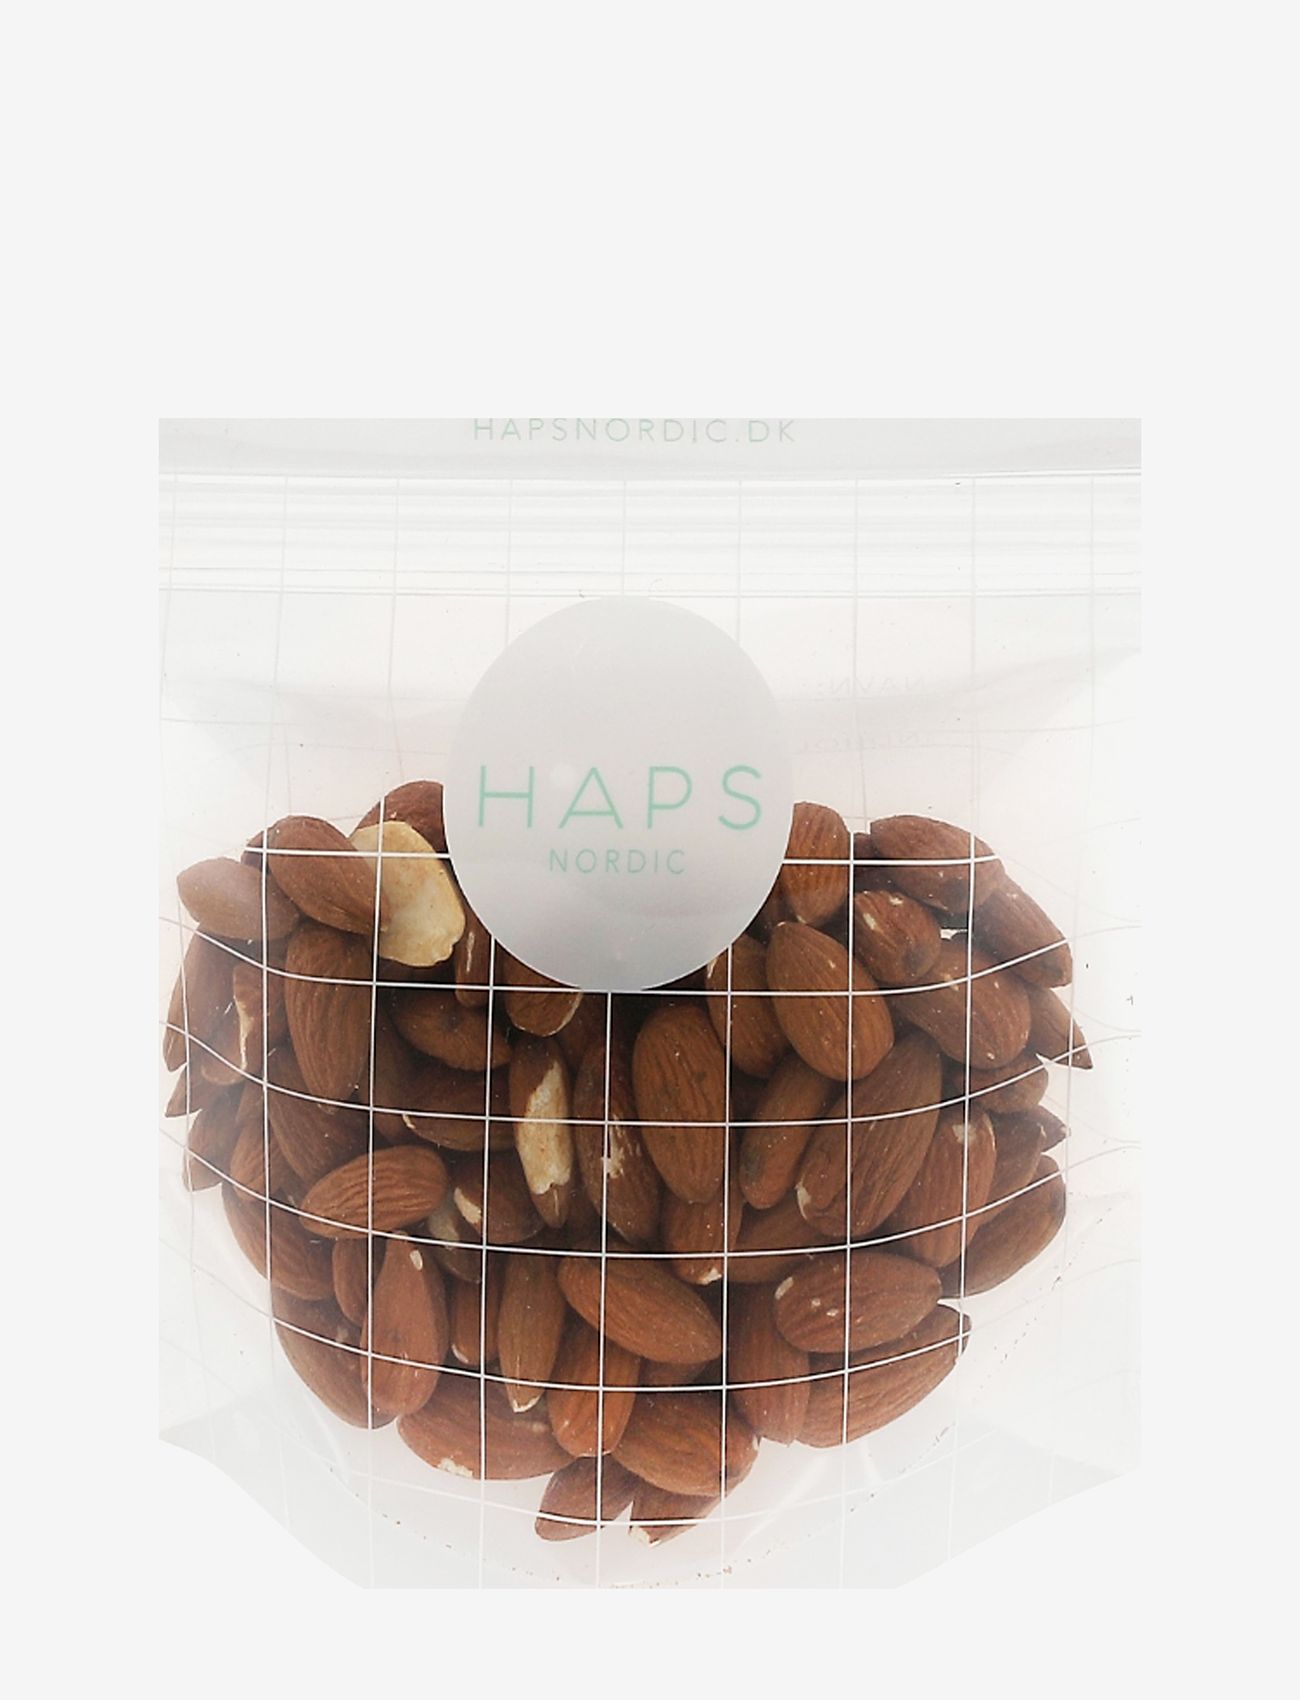 Haps Nordic - Reusable Snack Bag 400 ml - lowest prices - transparent check - 1